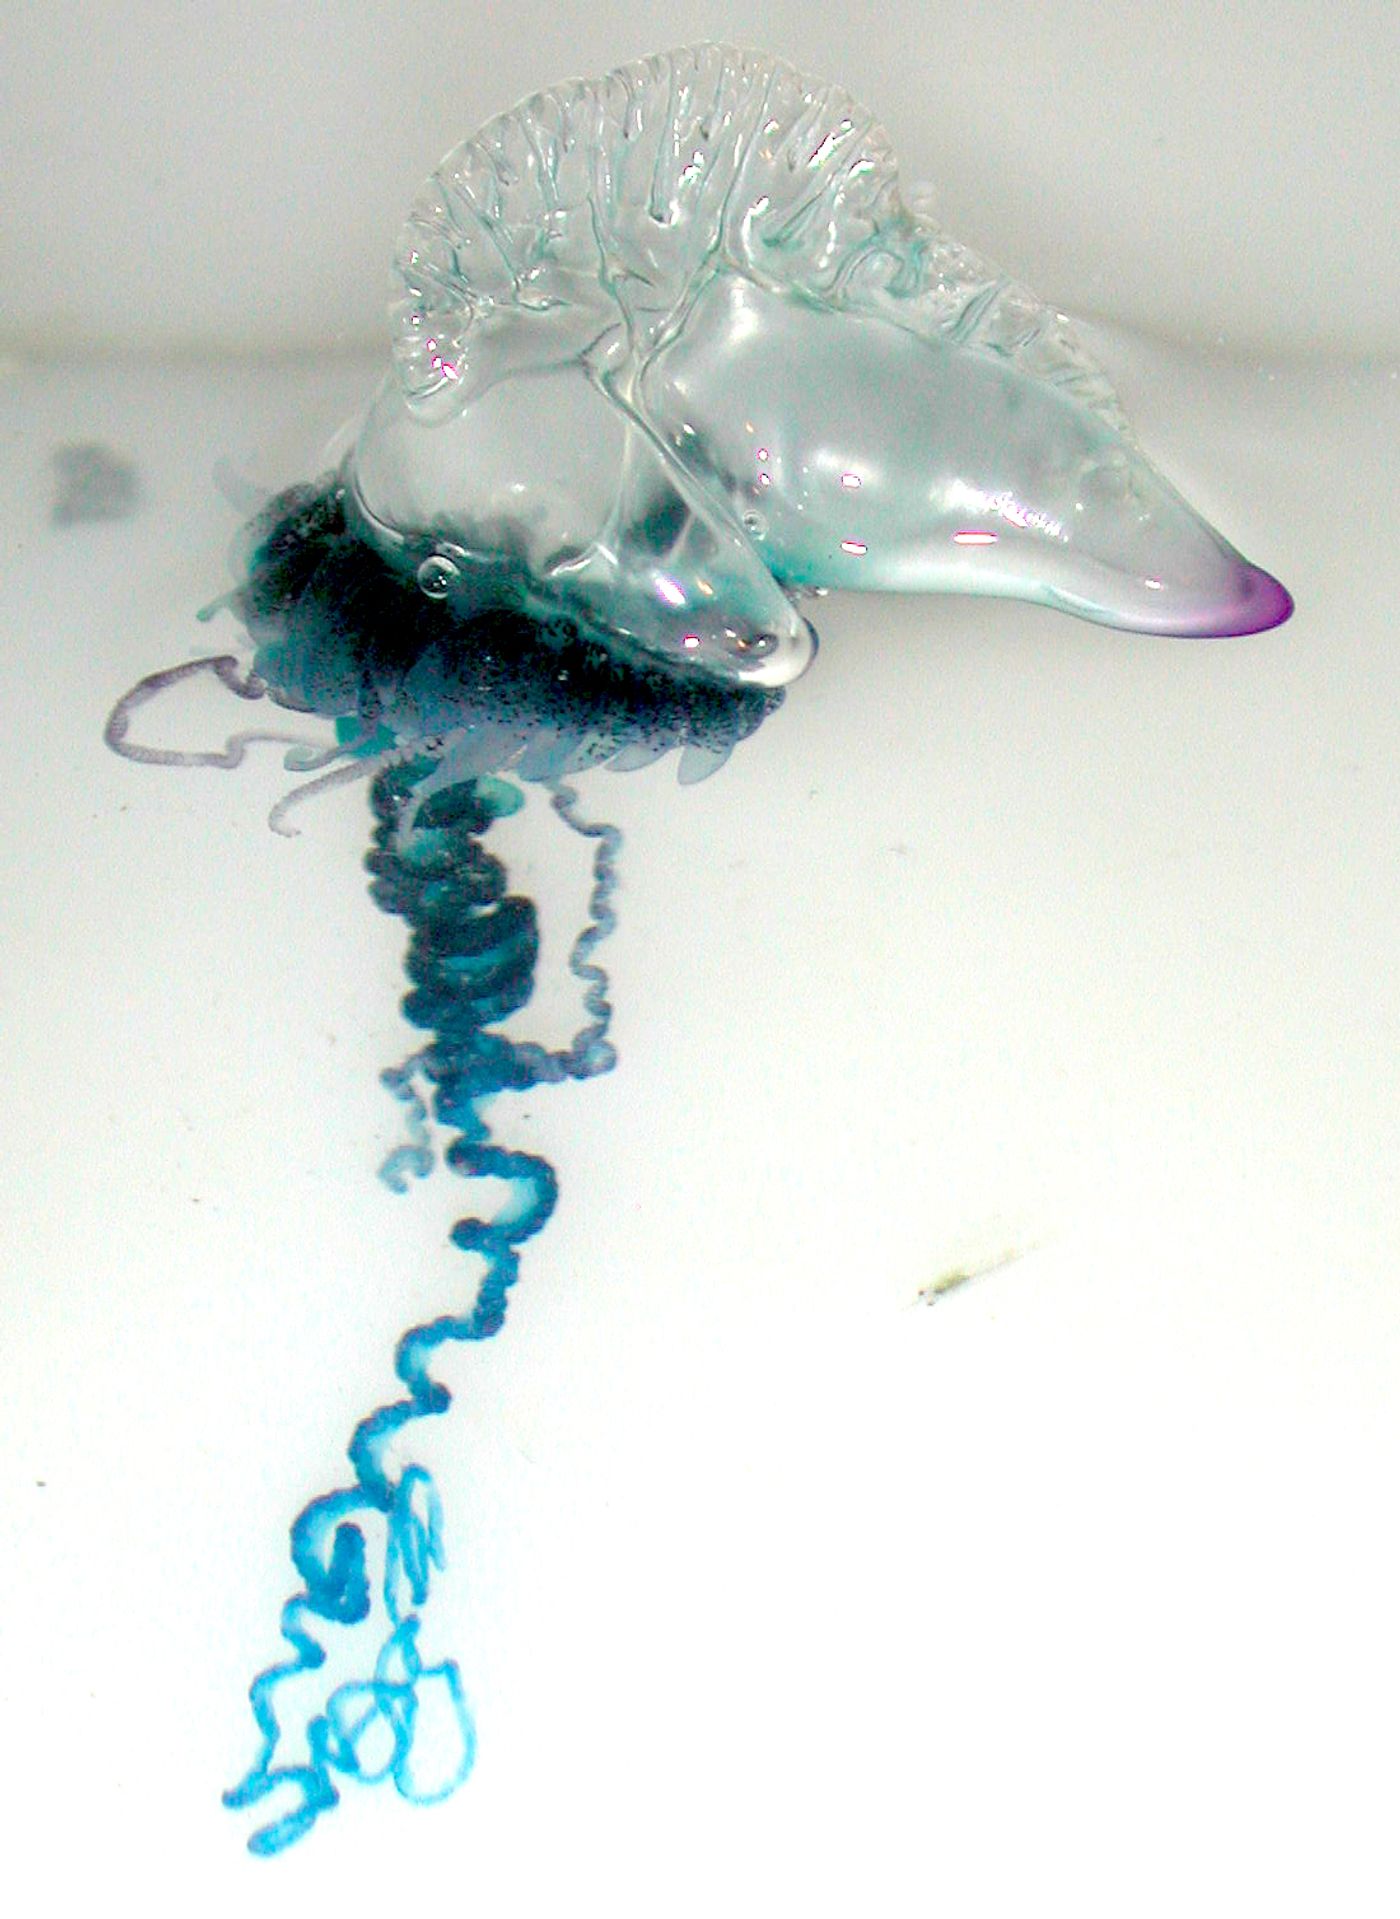 A Portuguese man-o-war is one of the most well-known surface-dwelling neuston, actually being a colony of smaller organisms as opposed to (its commonly mistaken identity as) a jellyfish